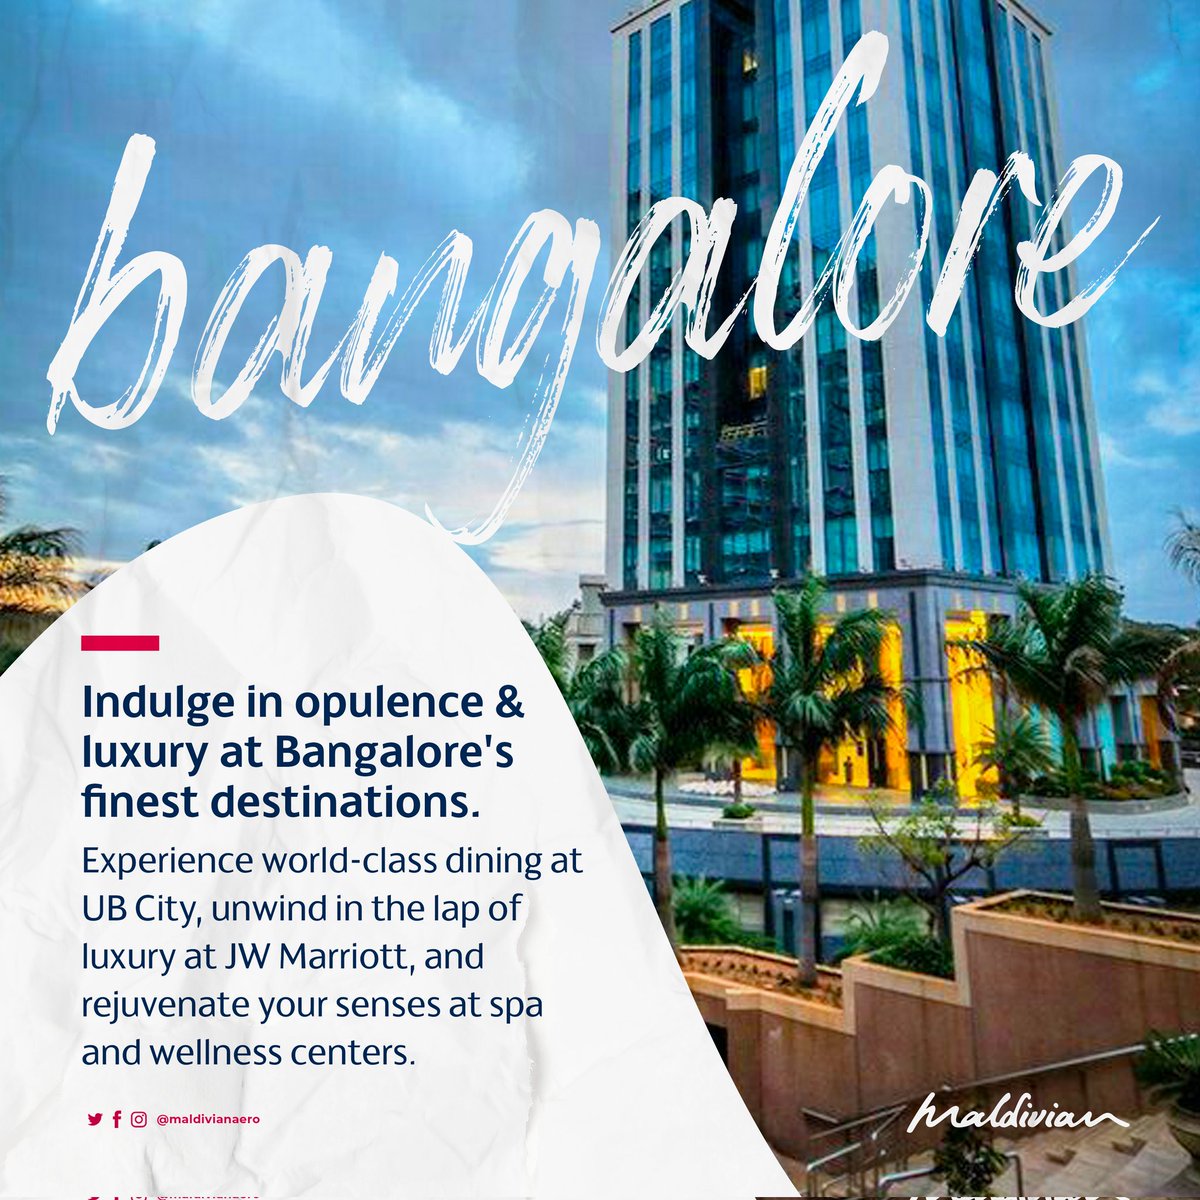 Immerse yourself in opulence and extravagance at Bangalore's most exquisite destinations. Starting October 30th, we're embarking on operations in Bangalore every Monday and Thursday. #BangaloreLuxury #DiningElegance #ultimaterelaxation